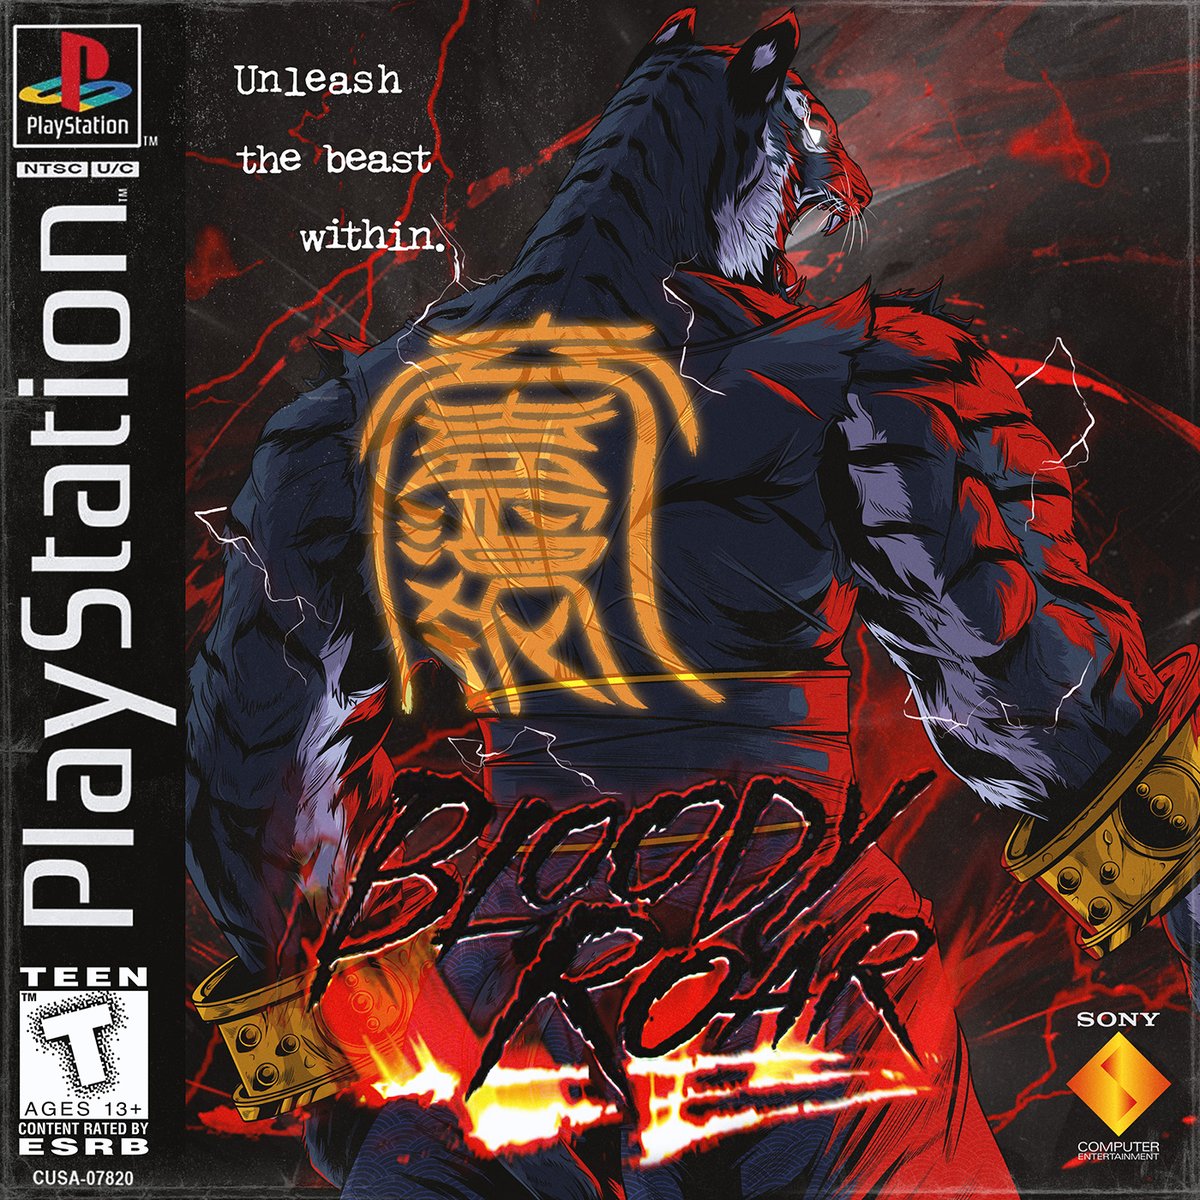 My Christmas wish is to bring back Bloody Roar!